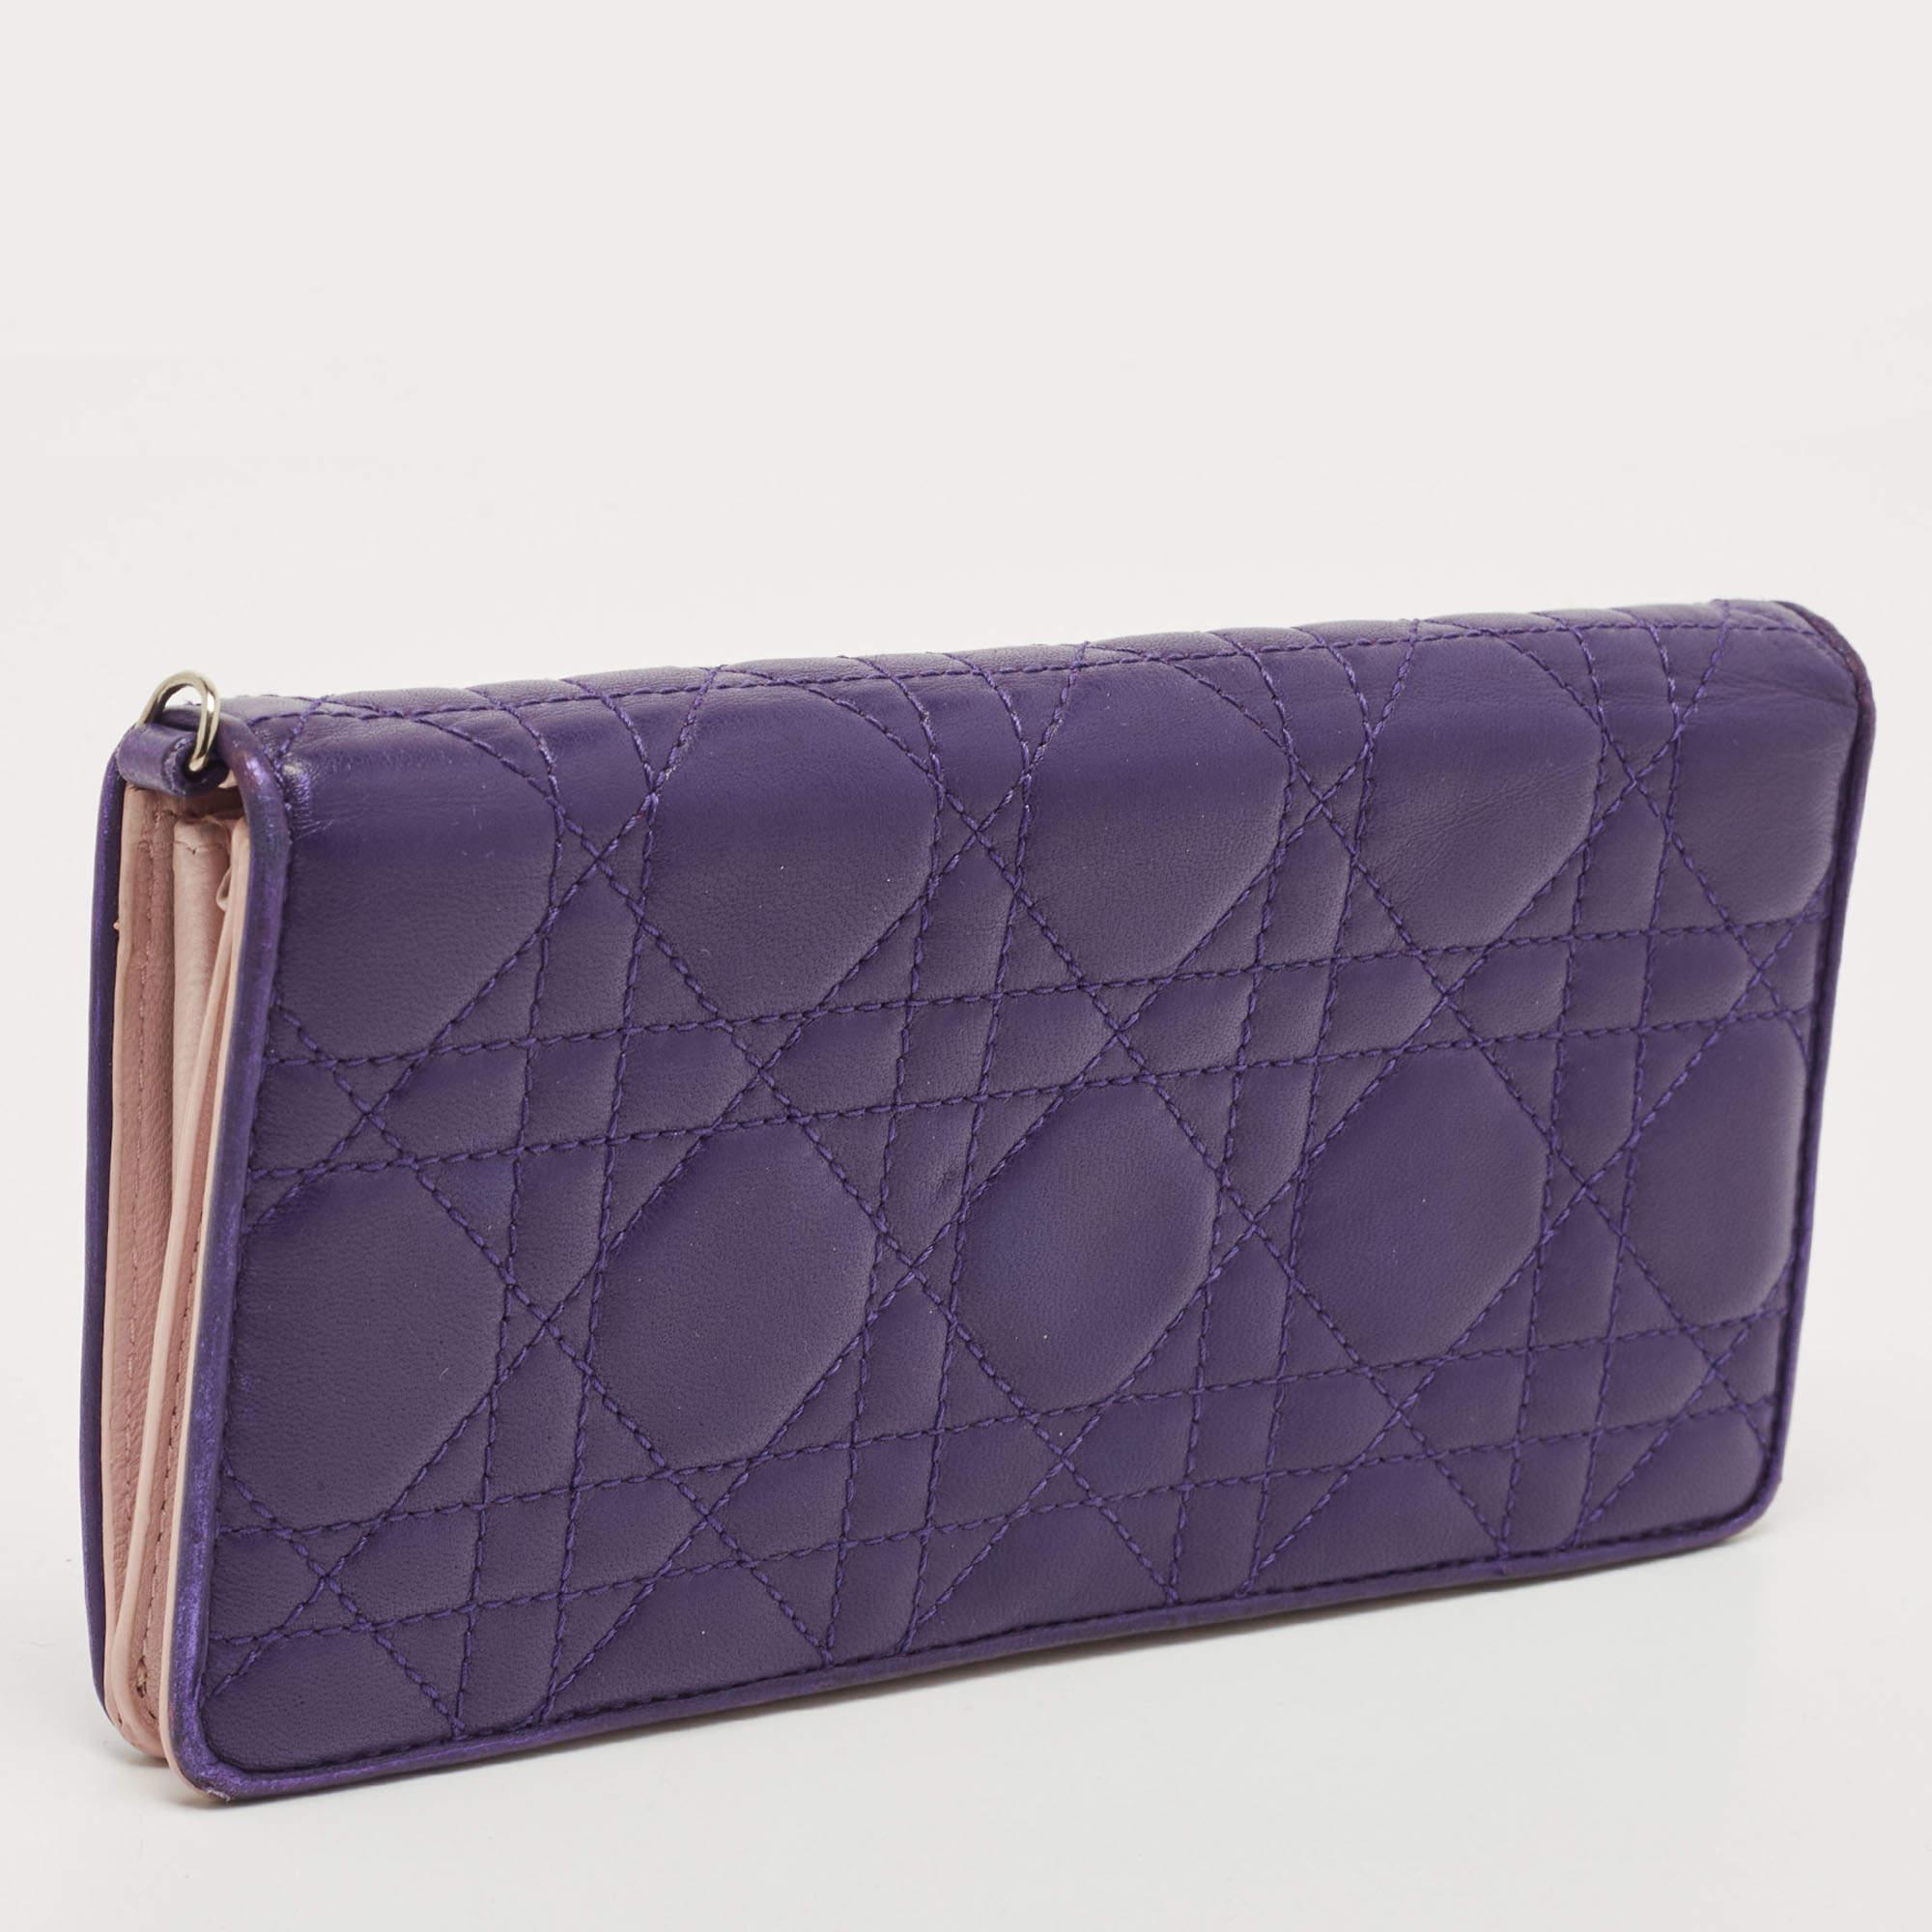 This wallet is conveniently designed for everyday use. Crafted from leather, the exterior has a quilted Cannage pattern and a zipper with a zipper pull. The leather and nylon lined interior houses multiple card slots, a zipped coin pocket, and open